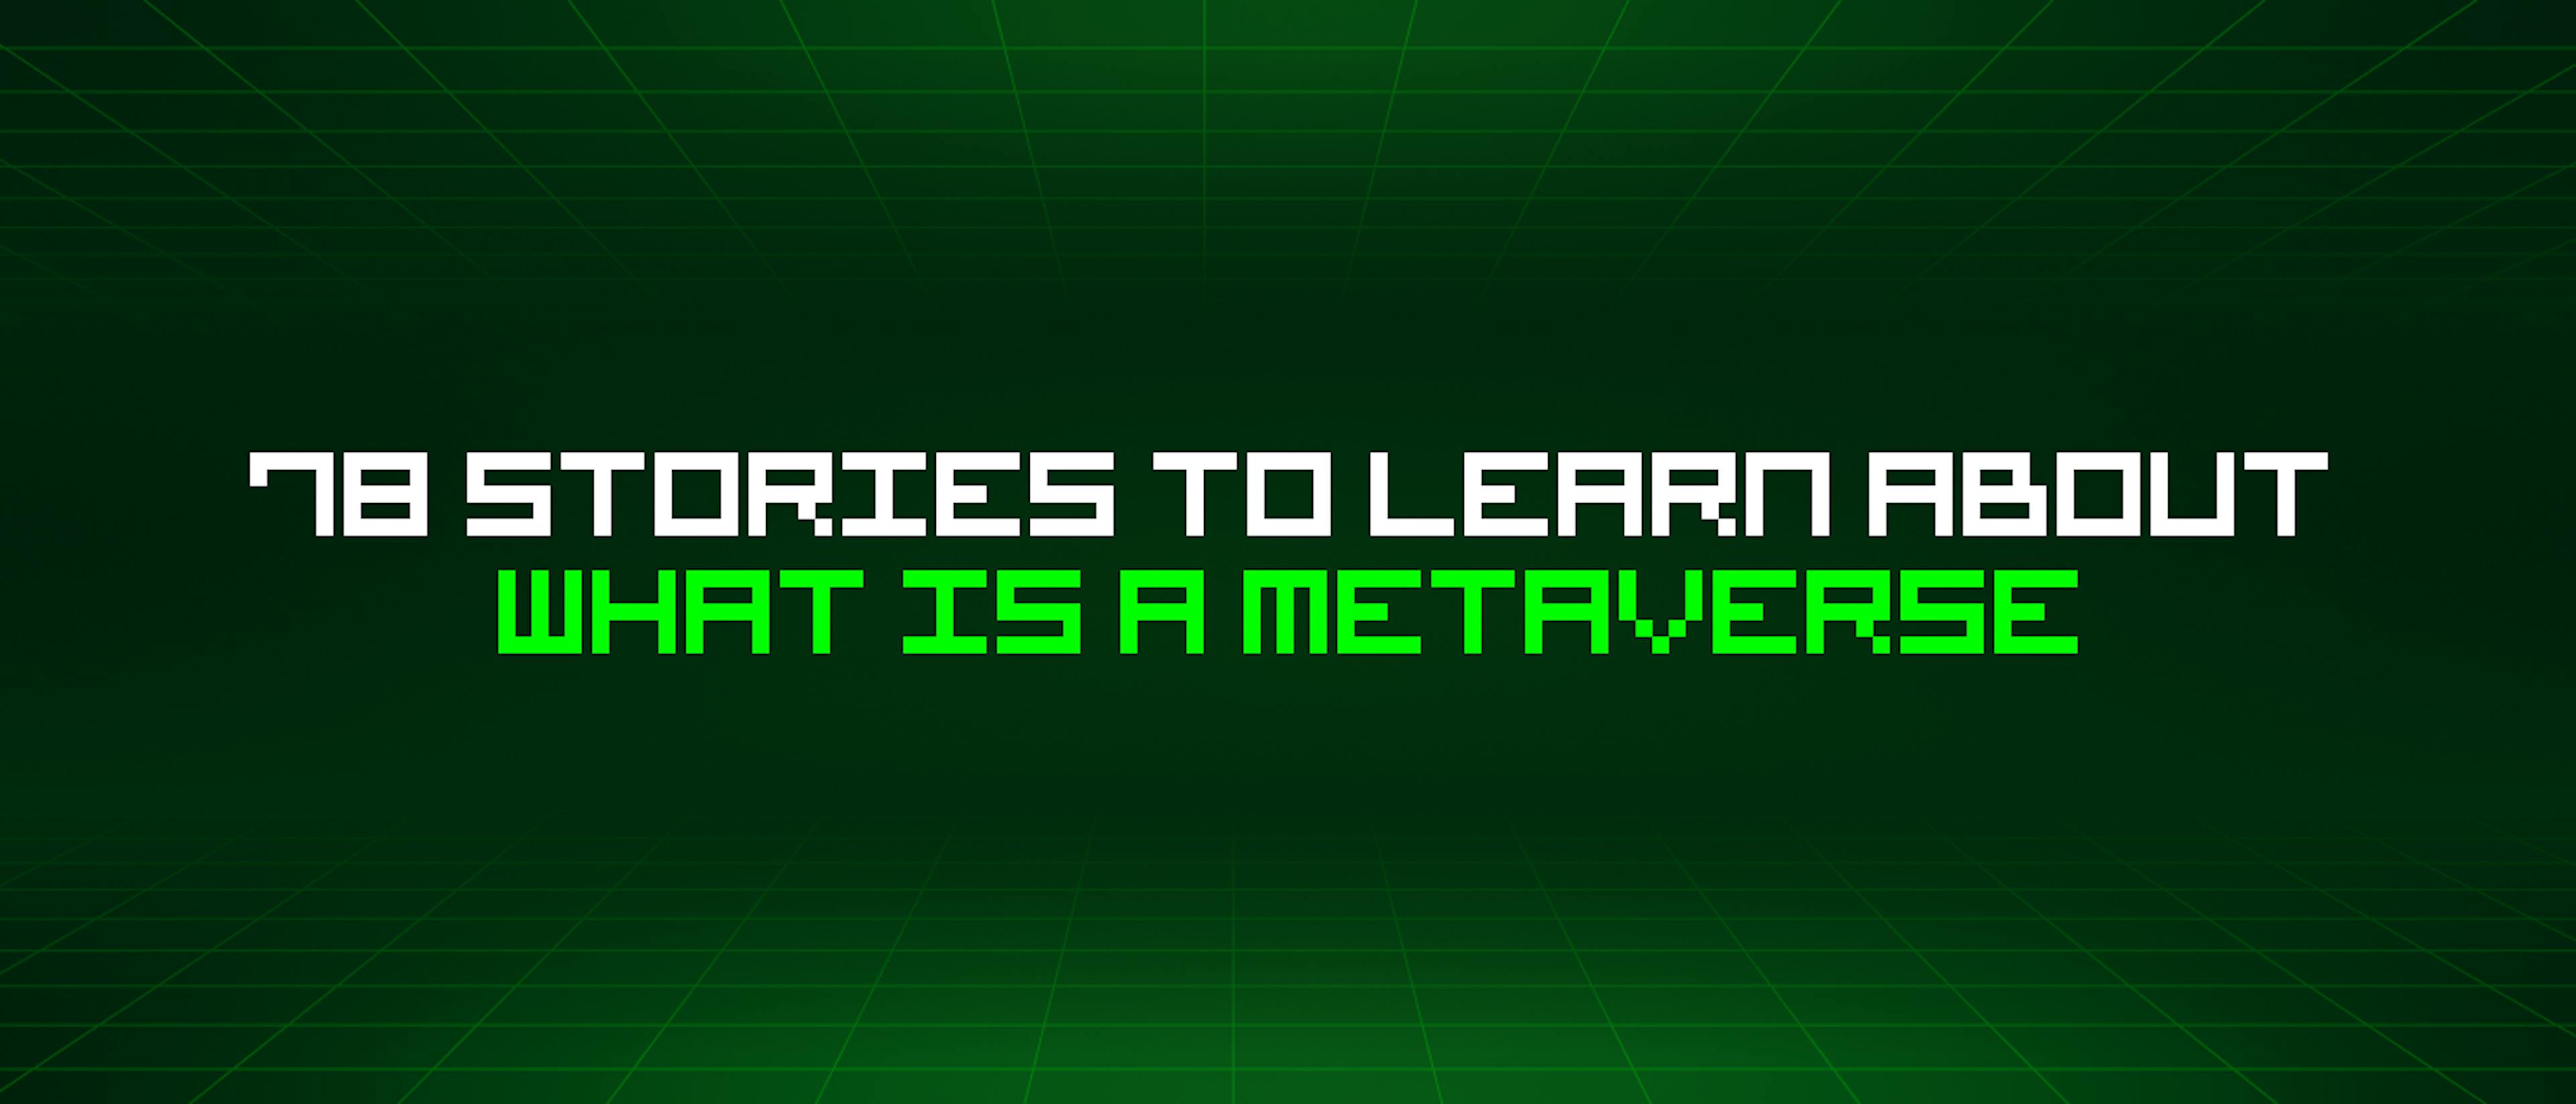 featured image - 78 Stories To Learn About What Is A Metaverse